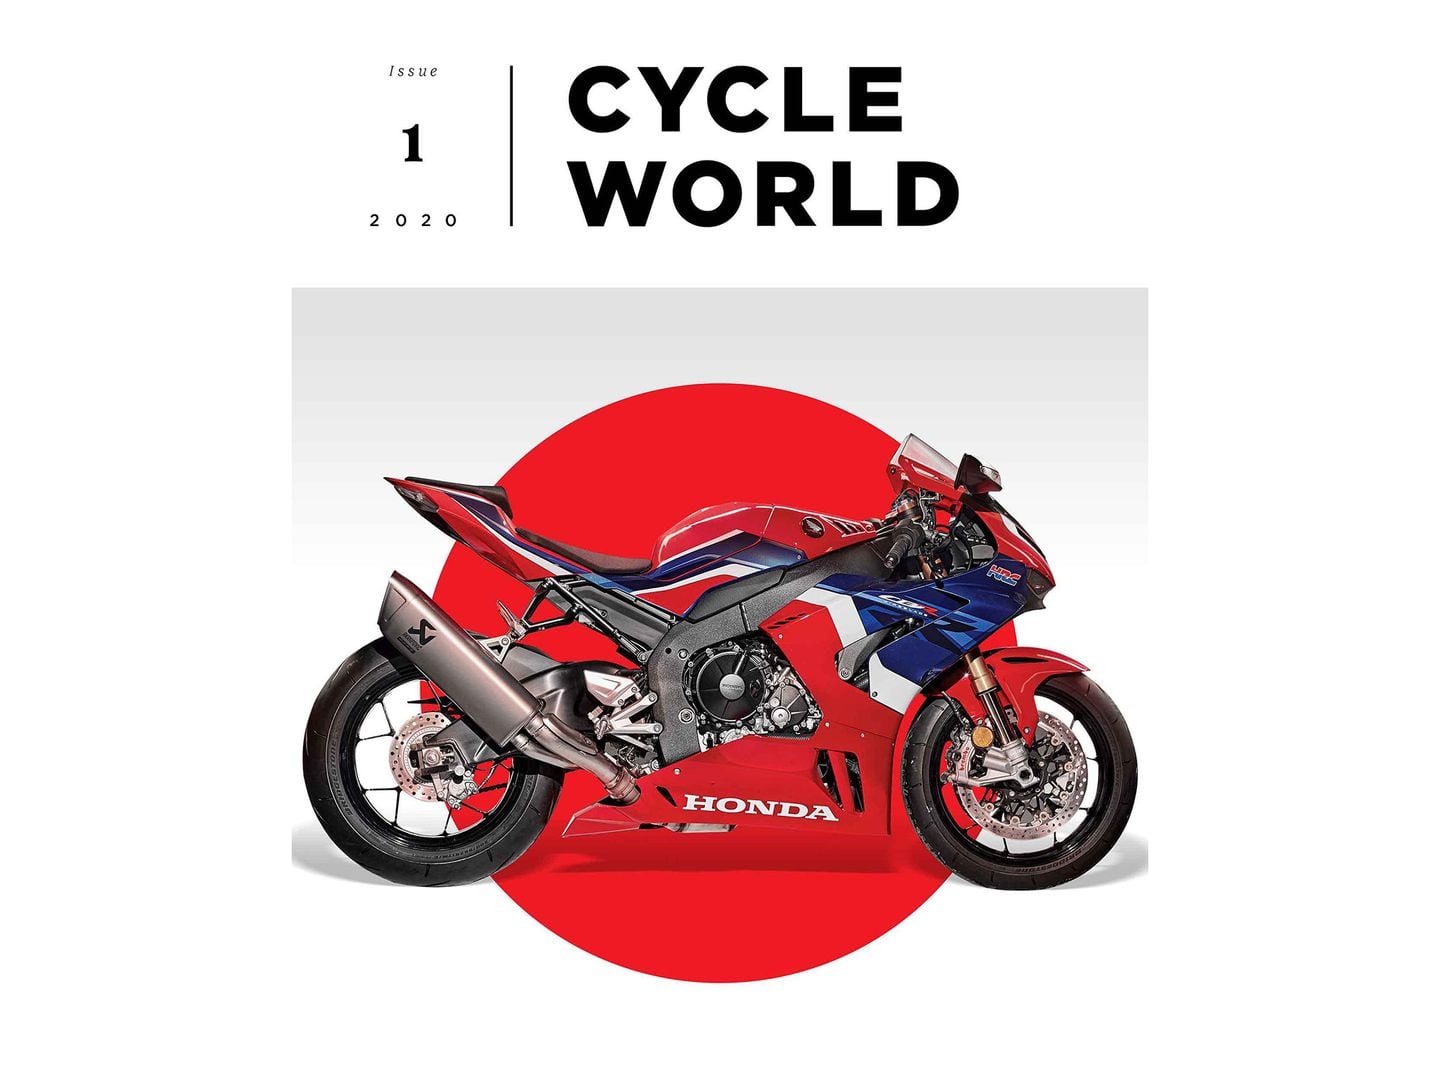 Cycle Worlds New Home | Cycle World